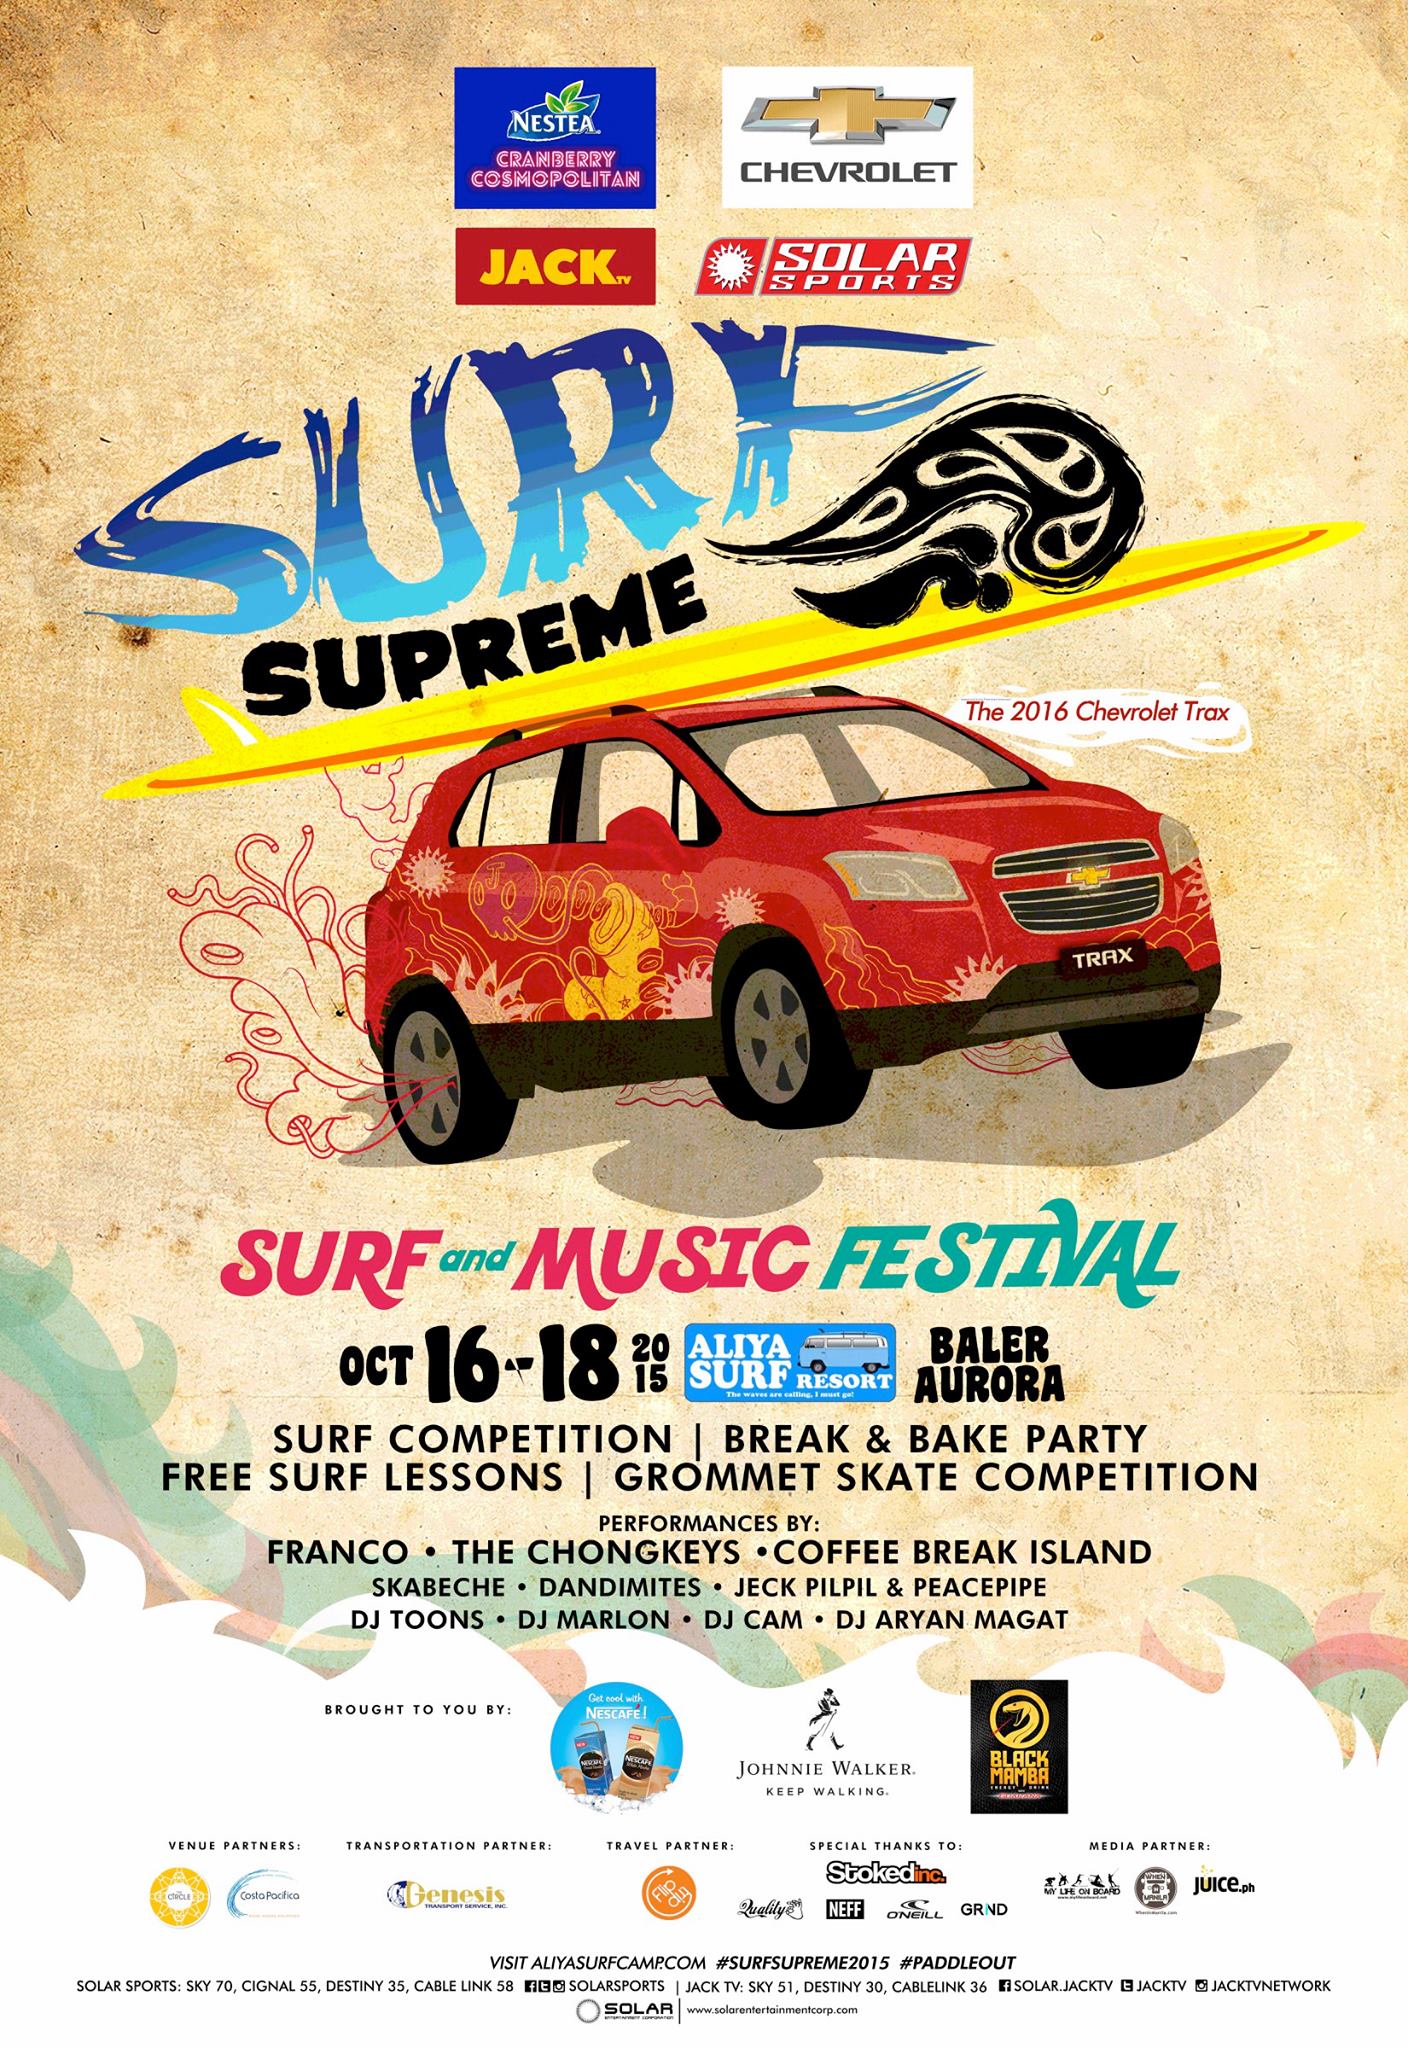 October 16 - October 18 Oct 16 at 2:00pm to Oct 18 at 11:55pm Show Map Aliya Surf Camp, Baler, Aurora buton st. sabang baler, 3200 Baler, Philippines Find Tickets Tickets Available fliptrip.ph Solar Sports and JackTV are bringing Surf Supreme 2015 to Baler this coming October 16 to 18! A surf and music festival weekend like no other, enjoy a surf and grommet skate competition, while enjoying great sounds. More information and packages to be announced soon! For inquiries, email travel@fliptrip.ph! #SurfSupreme2015 #PaddleOut #FlipTripGoesToSurfSupreme ---- Our friends at JACK TV and Solar Sports are once again teaming up to give surfing aficionados #SurfSupreme2015! Baler’s beautiful Aliya Surf Camp (Baler) will once again be the backdrop for a weekend filled with fun and excitement! This year promises great activities, prizes, and awesome experiences. Enjoy free surf lessons and check out The Grommet Skate Comp! To cap off the weekend, enjoy Baler’s glorious sunset as the country's top DJs and bands set the mood with sick beats and tunes for you to dance the night away. Excited yet? Pack your bags and join us at Baler from October 16 to 18 as #FlipTripGoesToSurfSupreme, the most exciting event to happen on this side of the archipelago! ---- Yewwww! Line up and activities are out as #FlipTripGoesToSurfSupreme! HIghlights include: Surf Competition | Break and Bake Party | FREE Surf Lessons | Grommet Skate Competition! Performances by Franco Suspitsados, The Chongkeys, CoffeeBreak Island(D Original), SKabeche, Dandimites, Jeck Pilpil & Peacepipe, Dj Toons, Dj Marlon, DJ Cam, and DJ Aryan Magat! #SurfSupreme2015 #PaddleOut